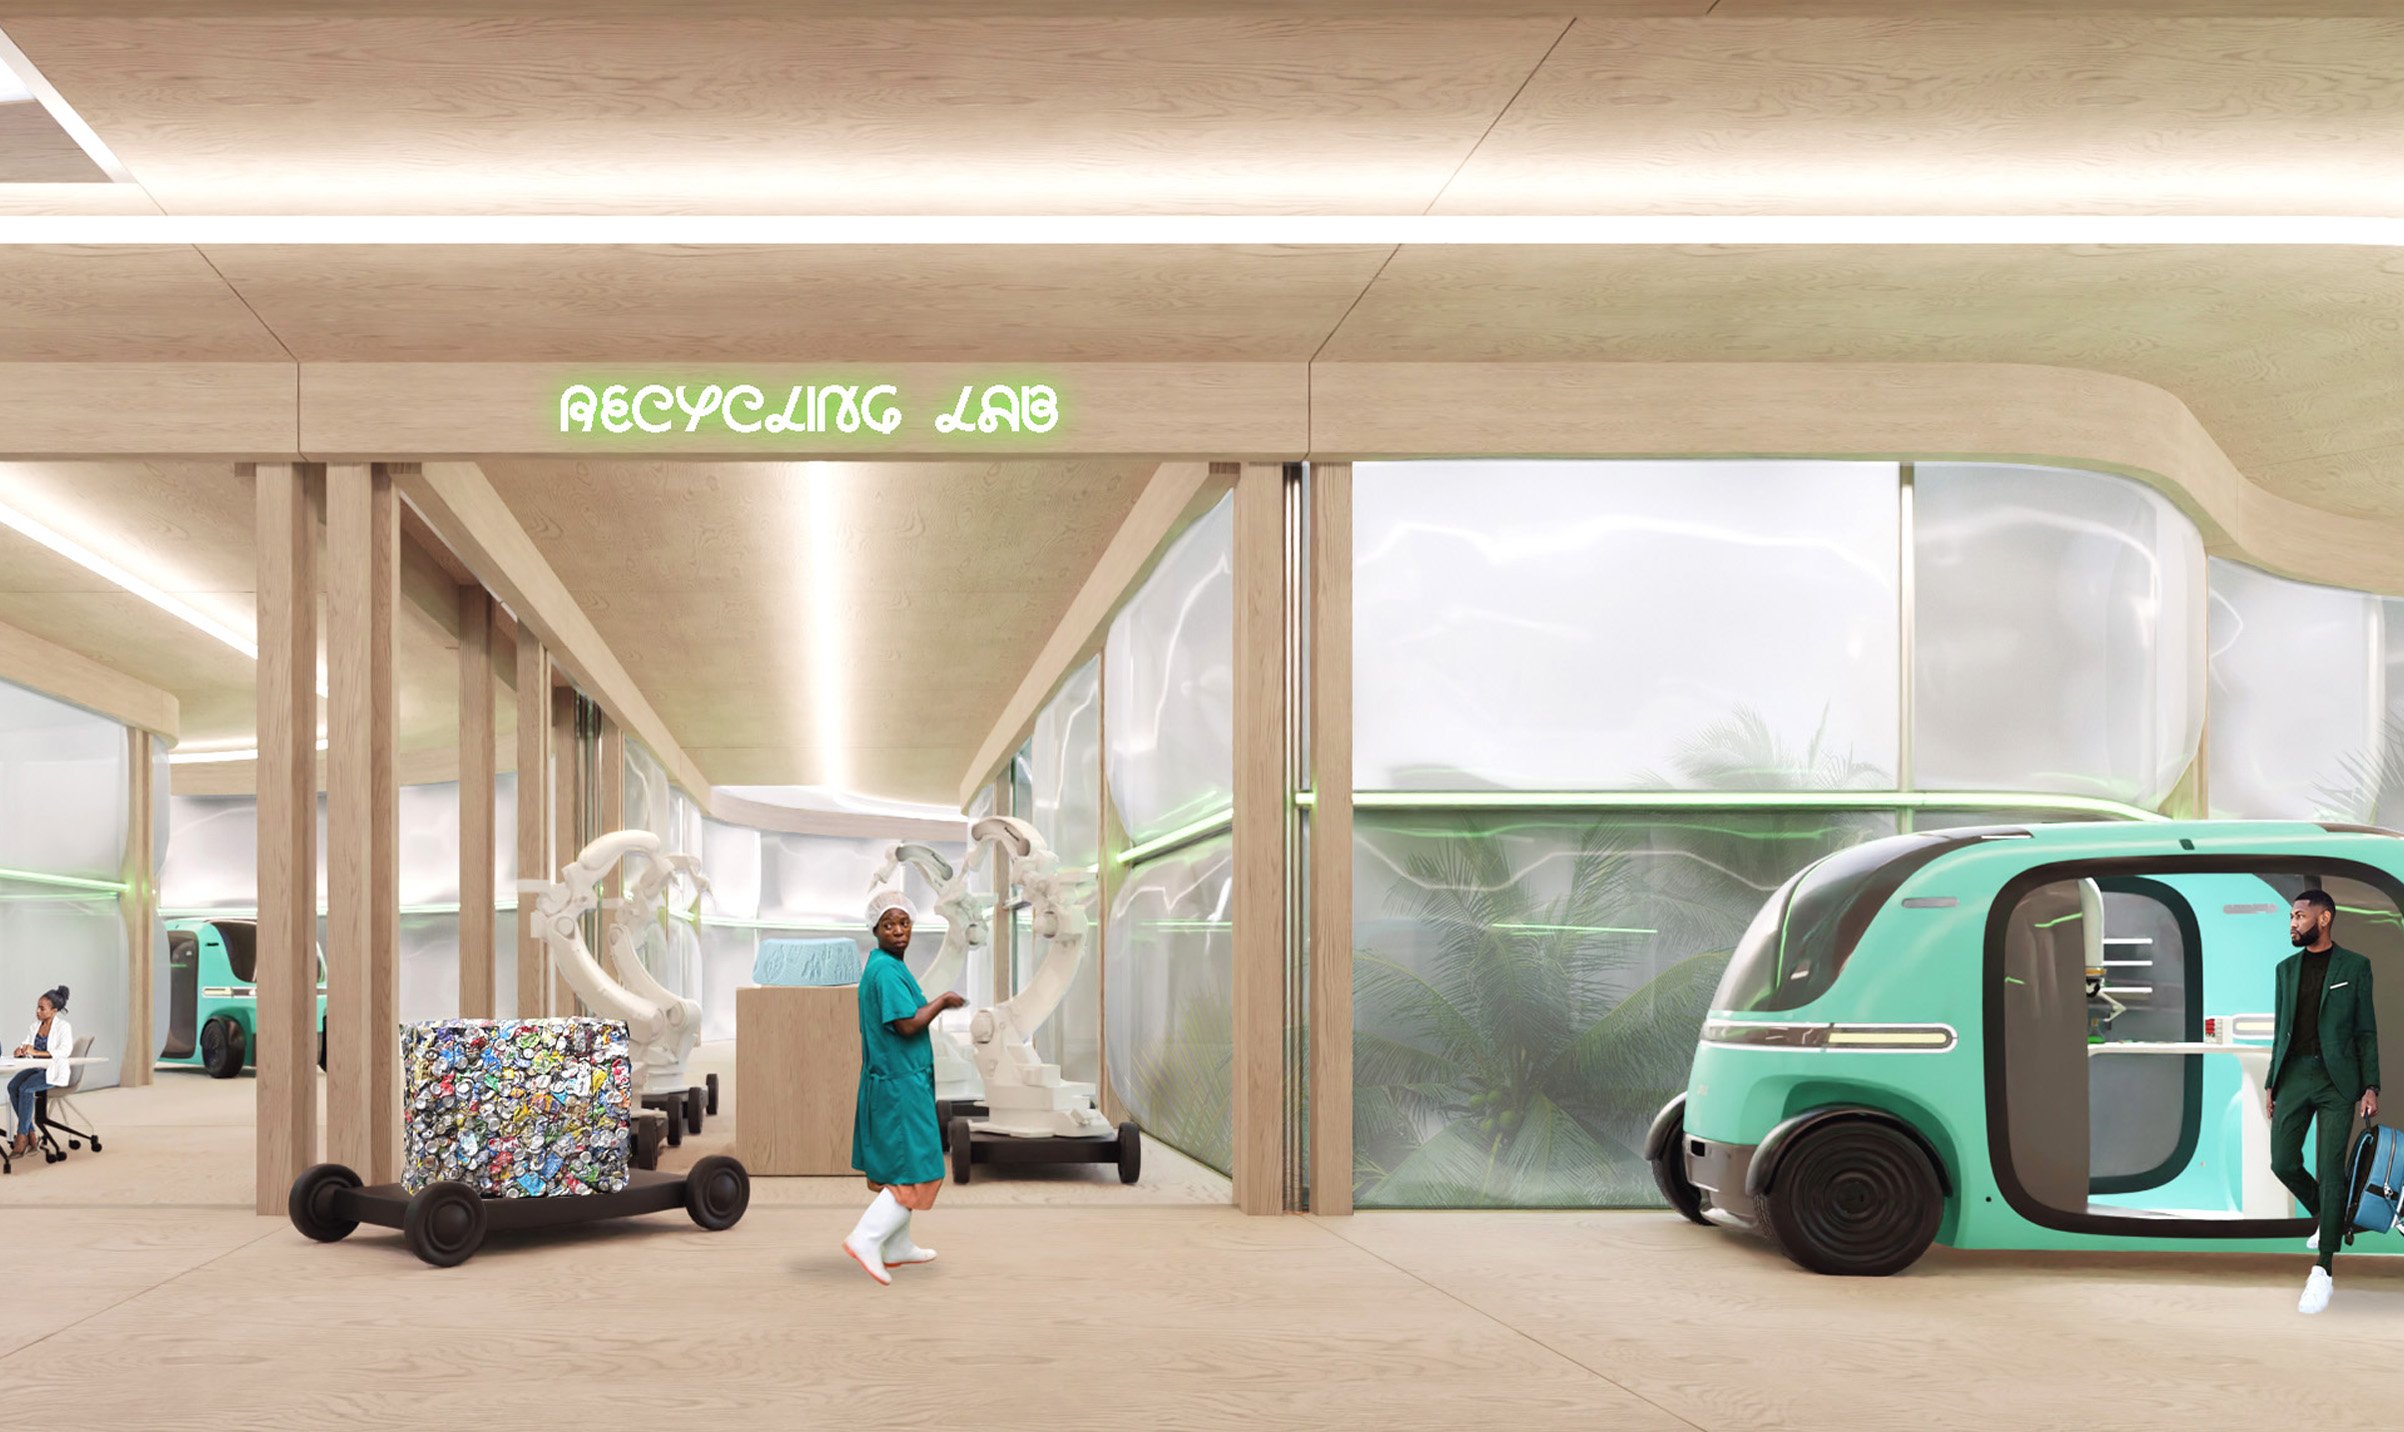 Perspective view on the recycling laboratory